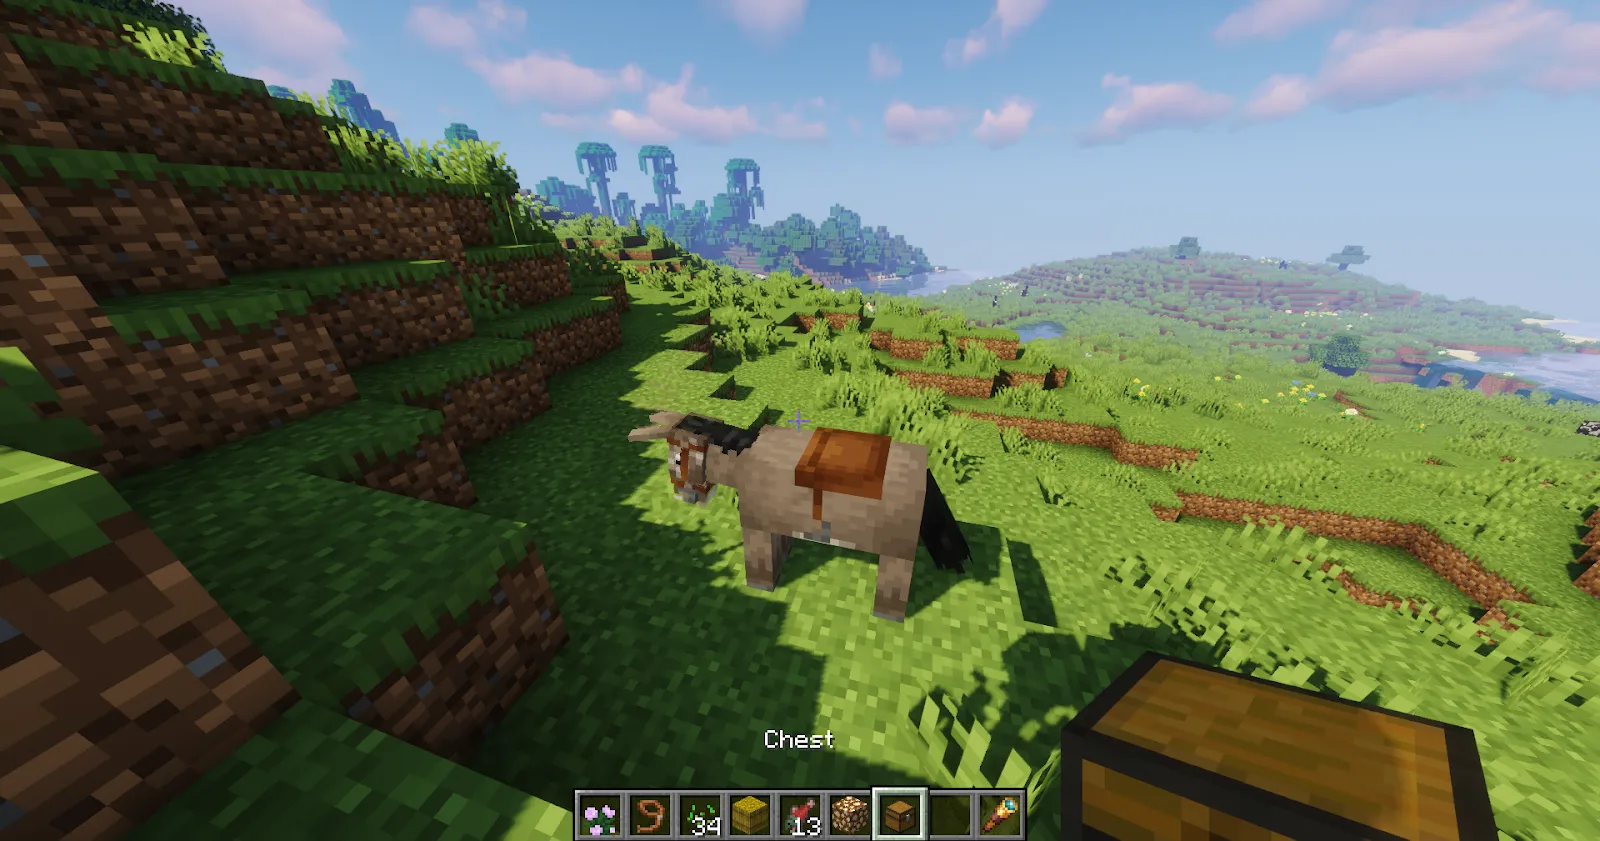 Approaching Minecraft Donkey with chest